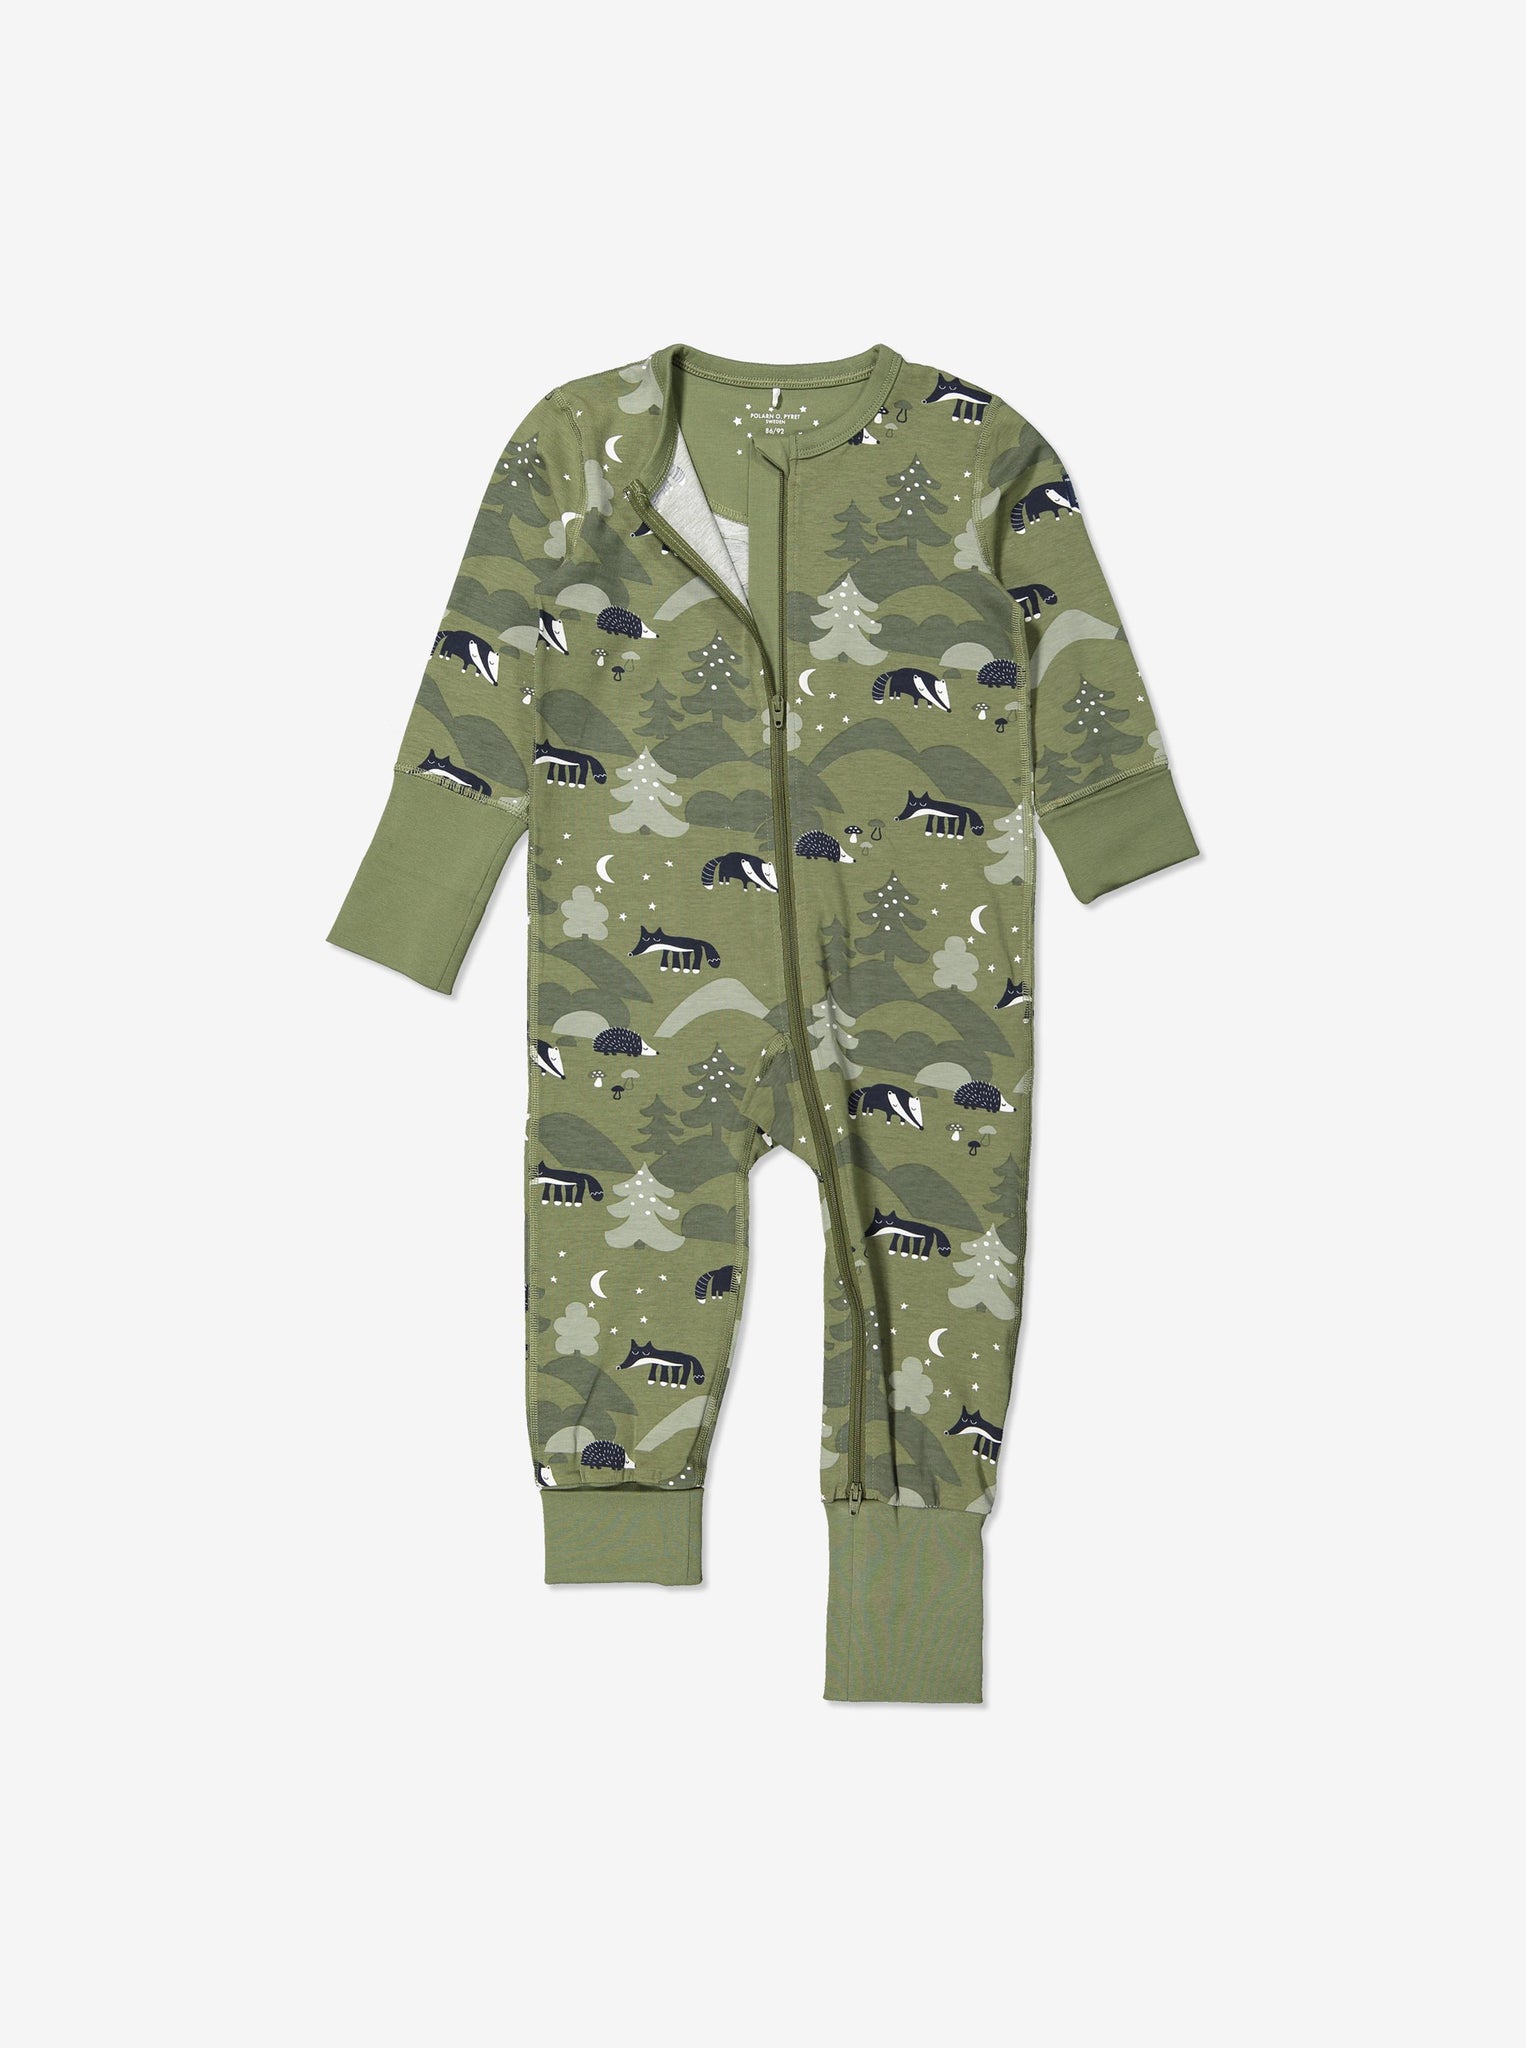 Green Organic Baby Sleepsuits, Ethical Baby Clothes | Polarn O. Pyret UK